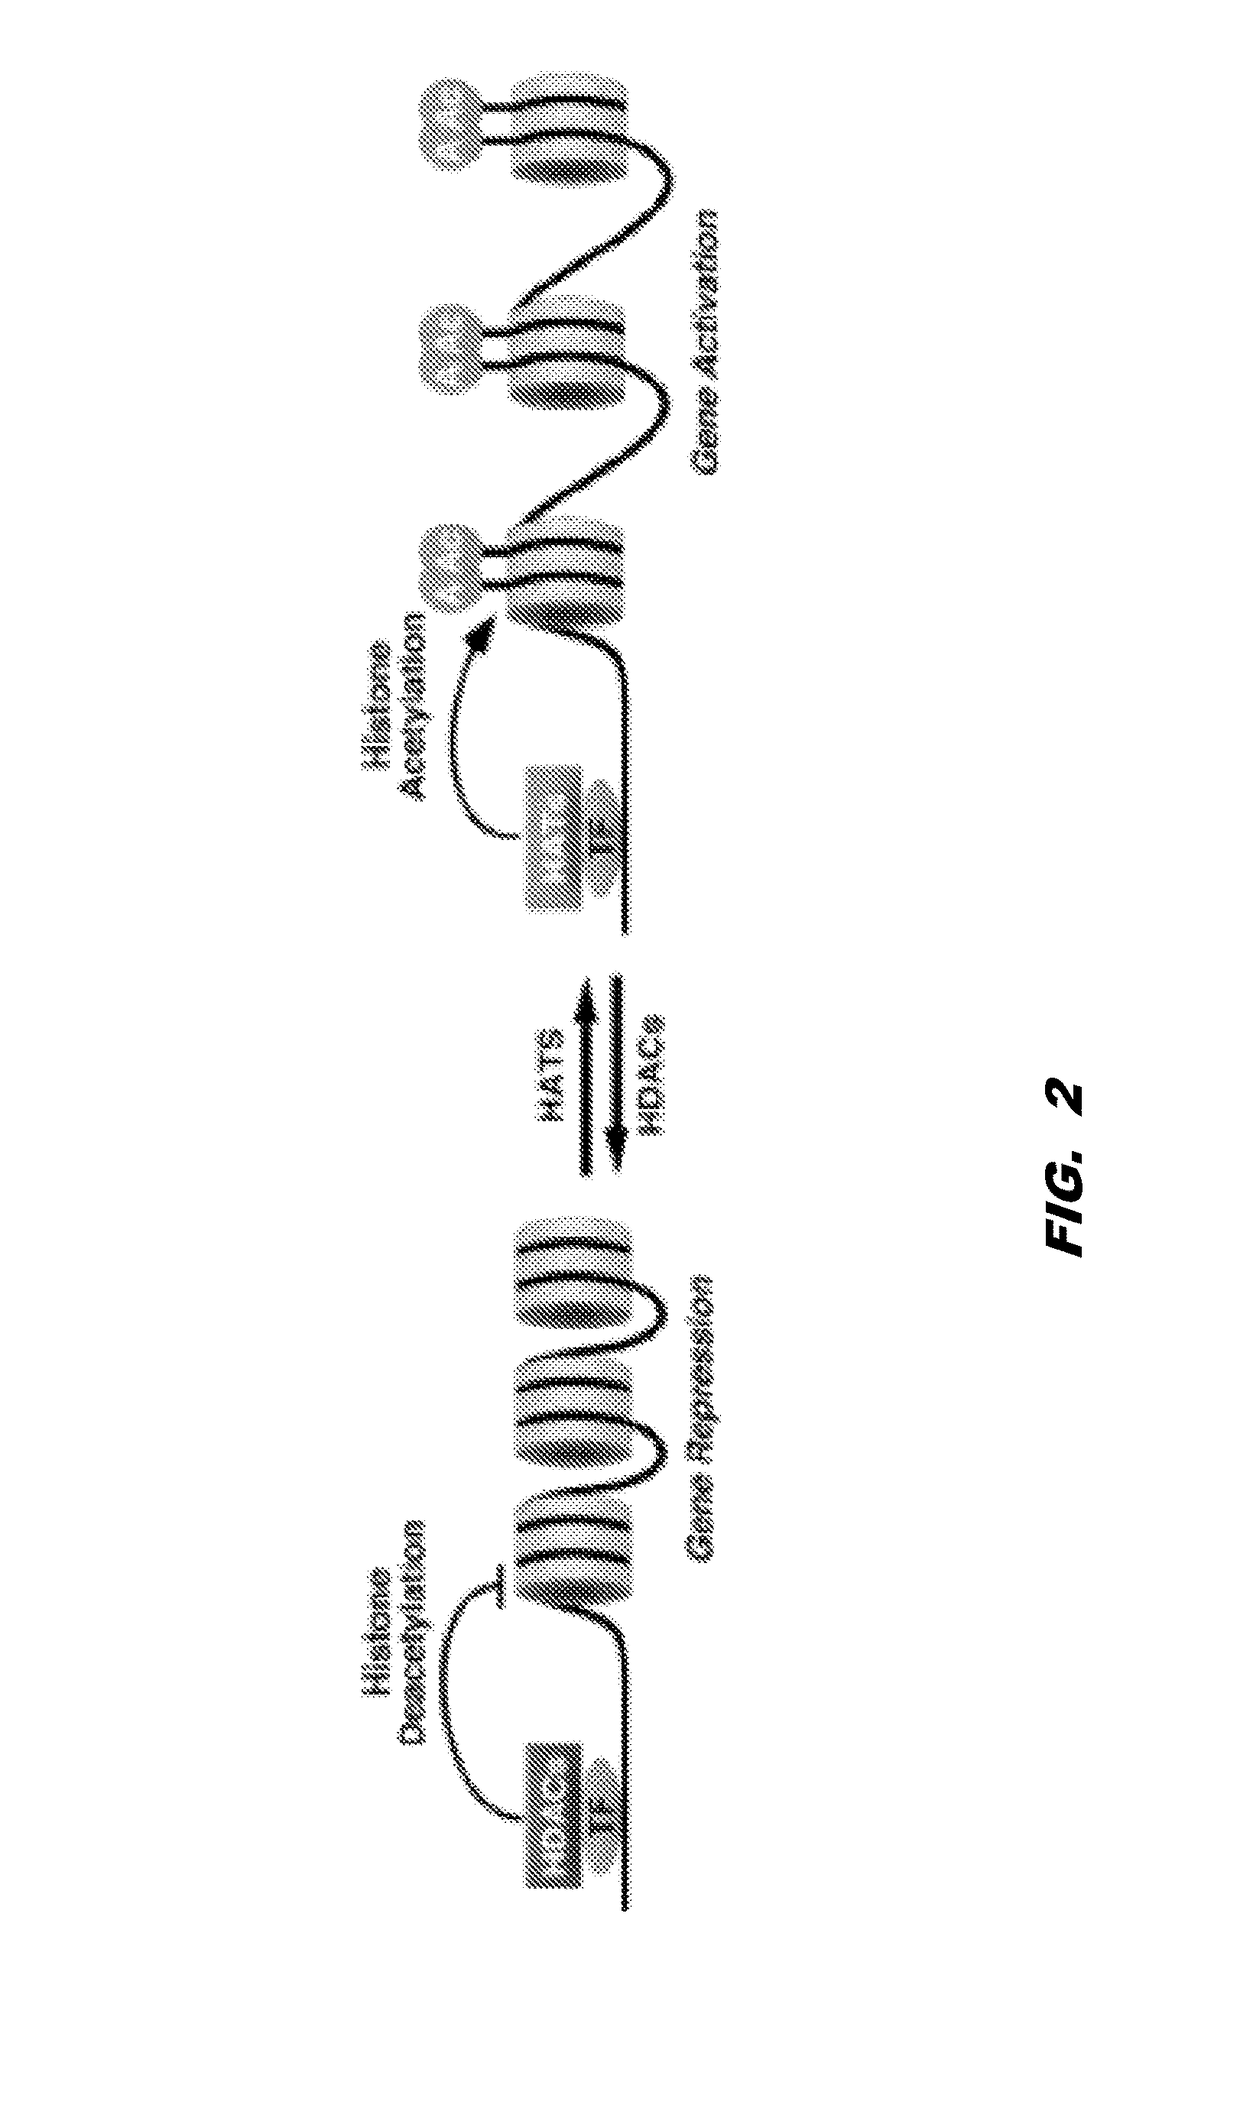 Histone acetyltransferase modulators and uses thereof